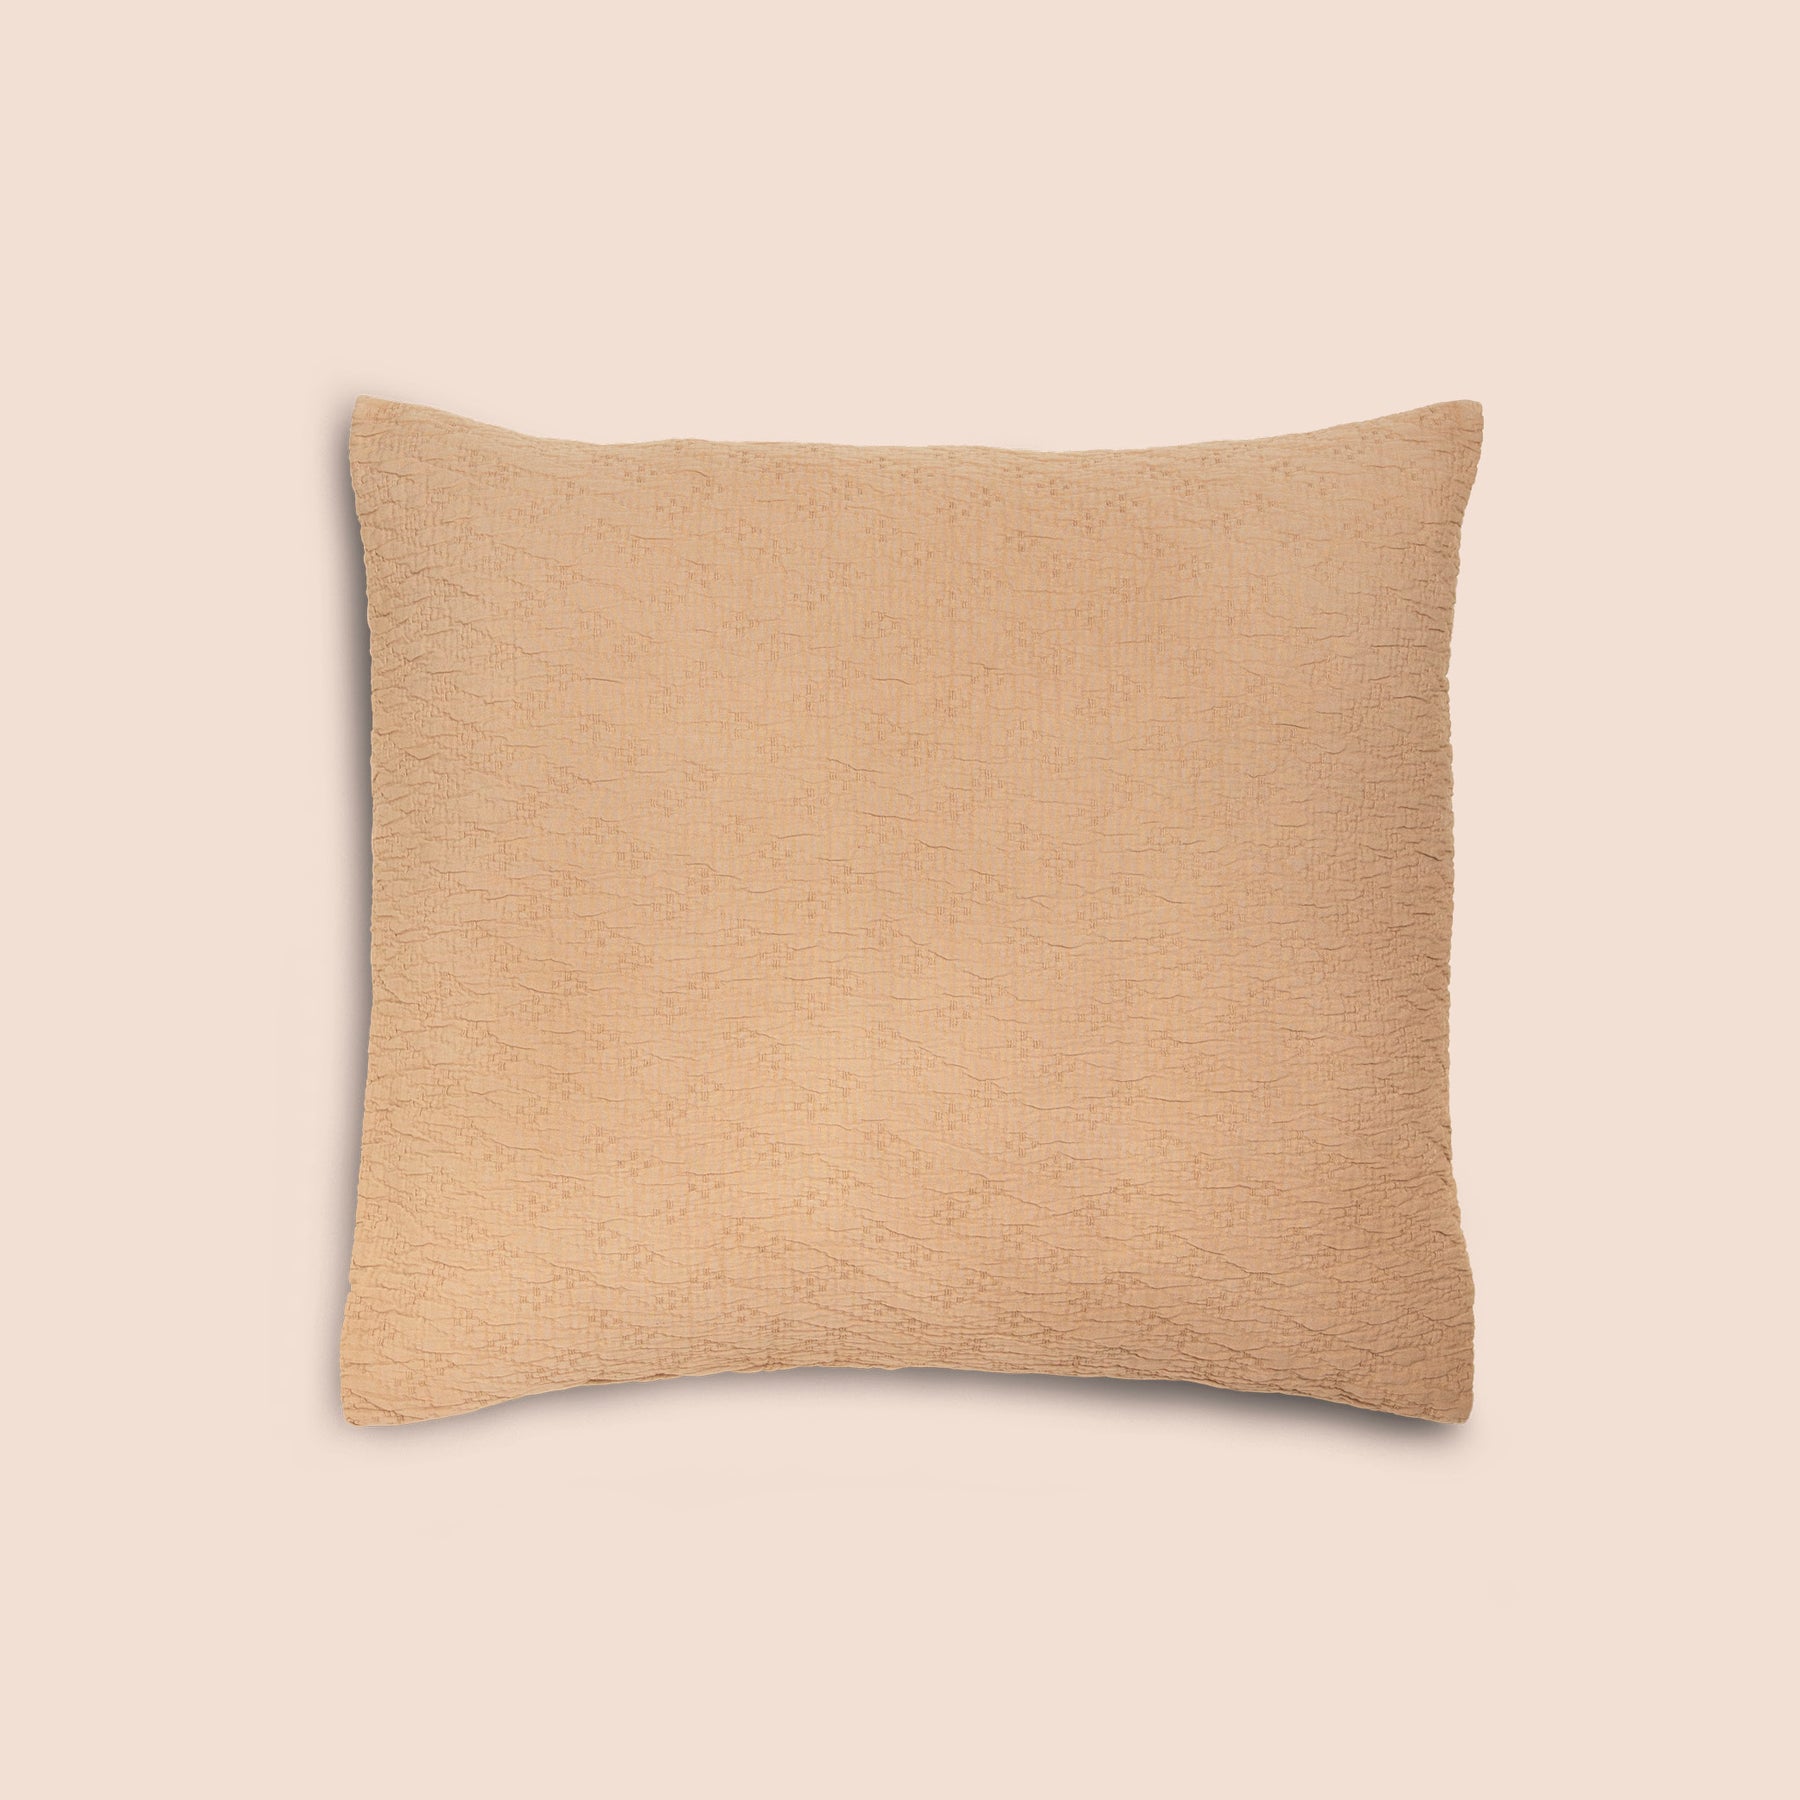 Image of an Ochre Wave Pillow Sham on a Euro pillow with a light pink background